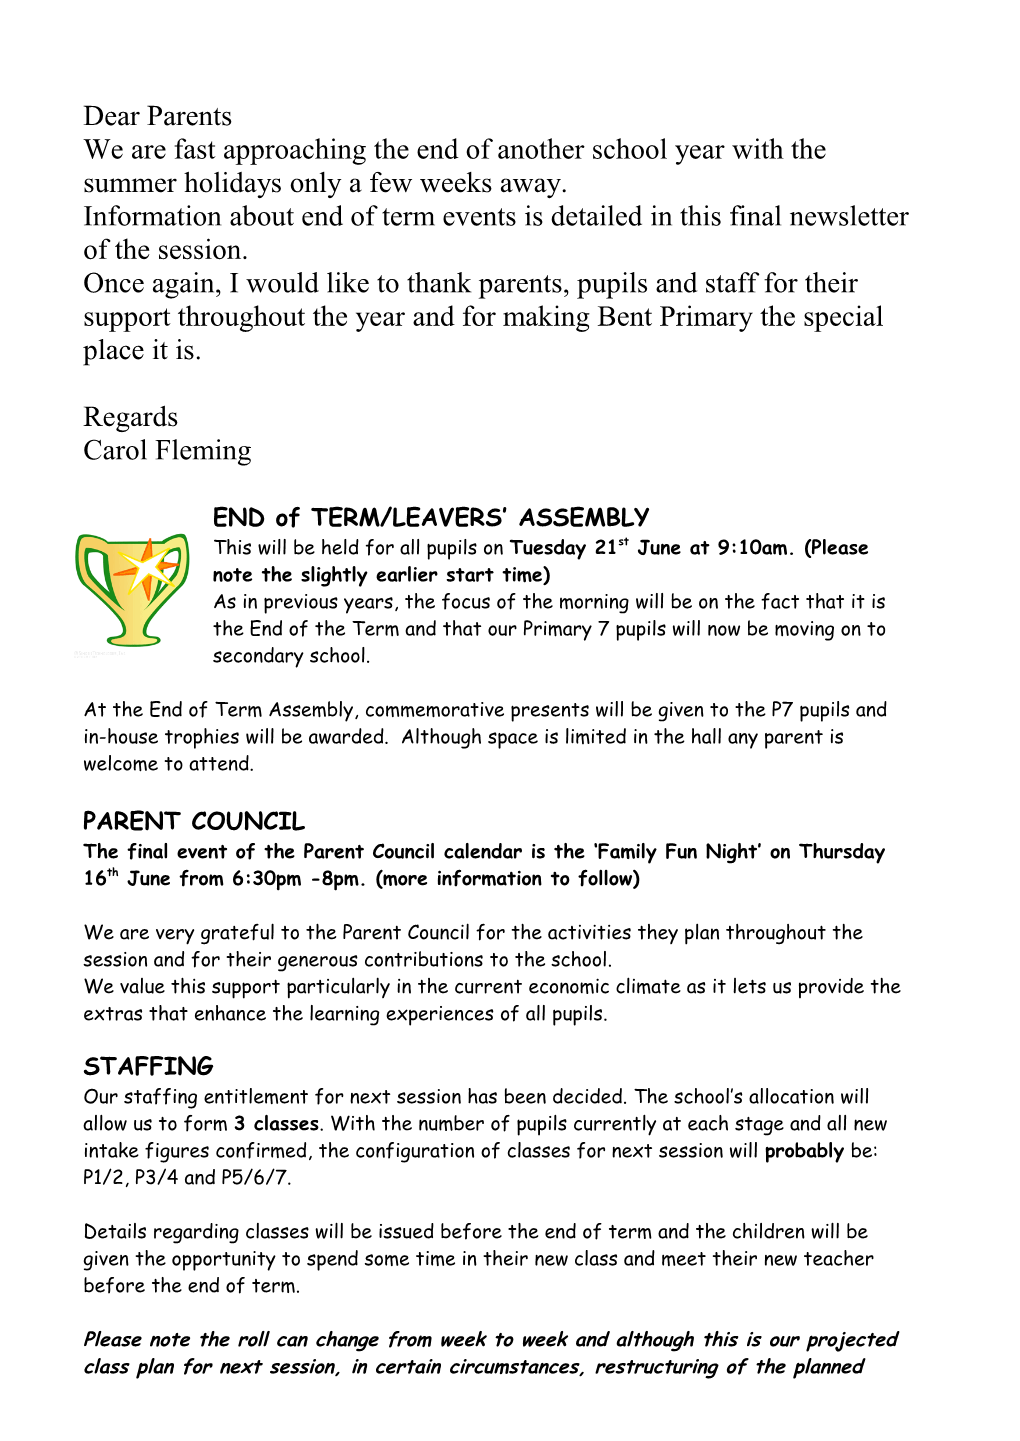 Information About End of Term Events Is Detailed in This Final Newsletter of the Session